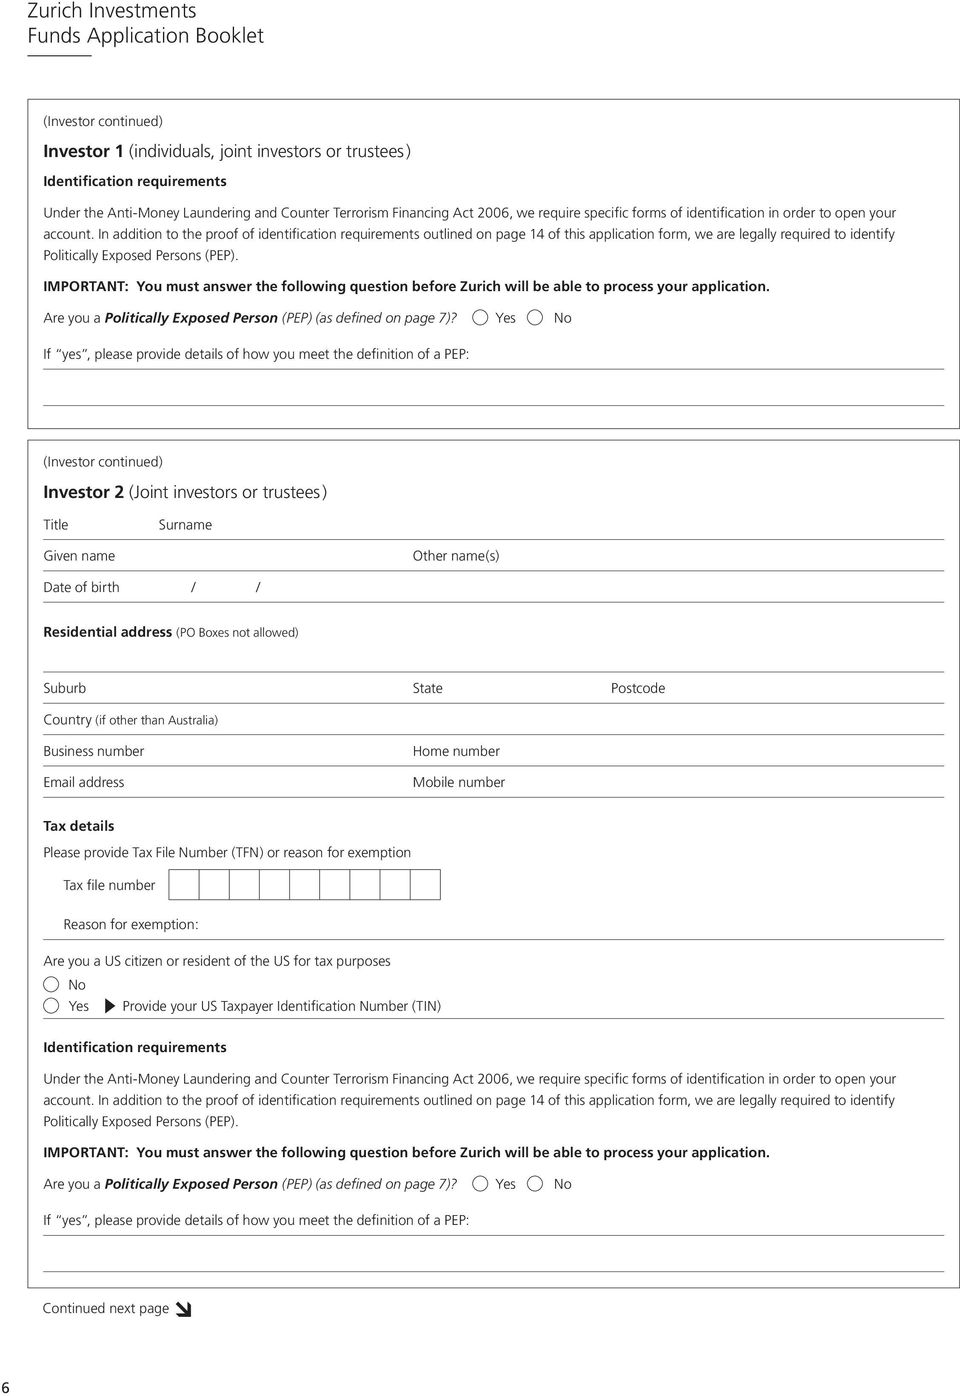 In addition to the proof of identification requirements outlined on page 14 of this application form, we are legally required to identify Politically Exposed Persons (PEP).